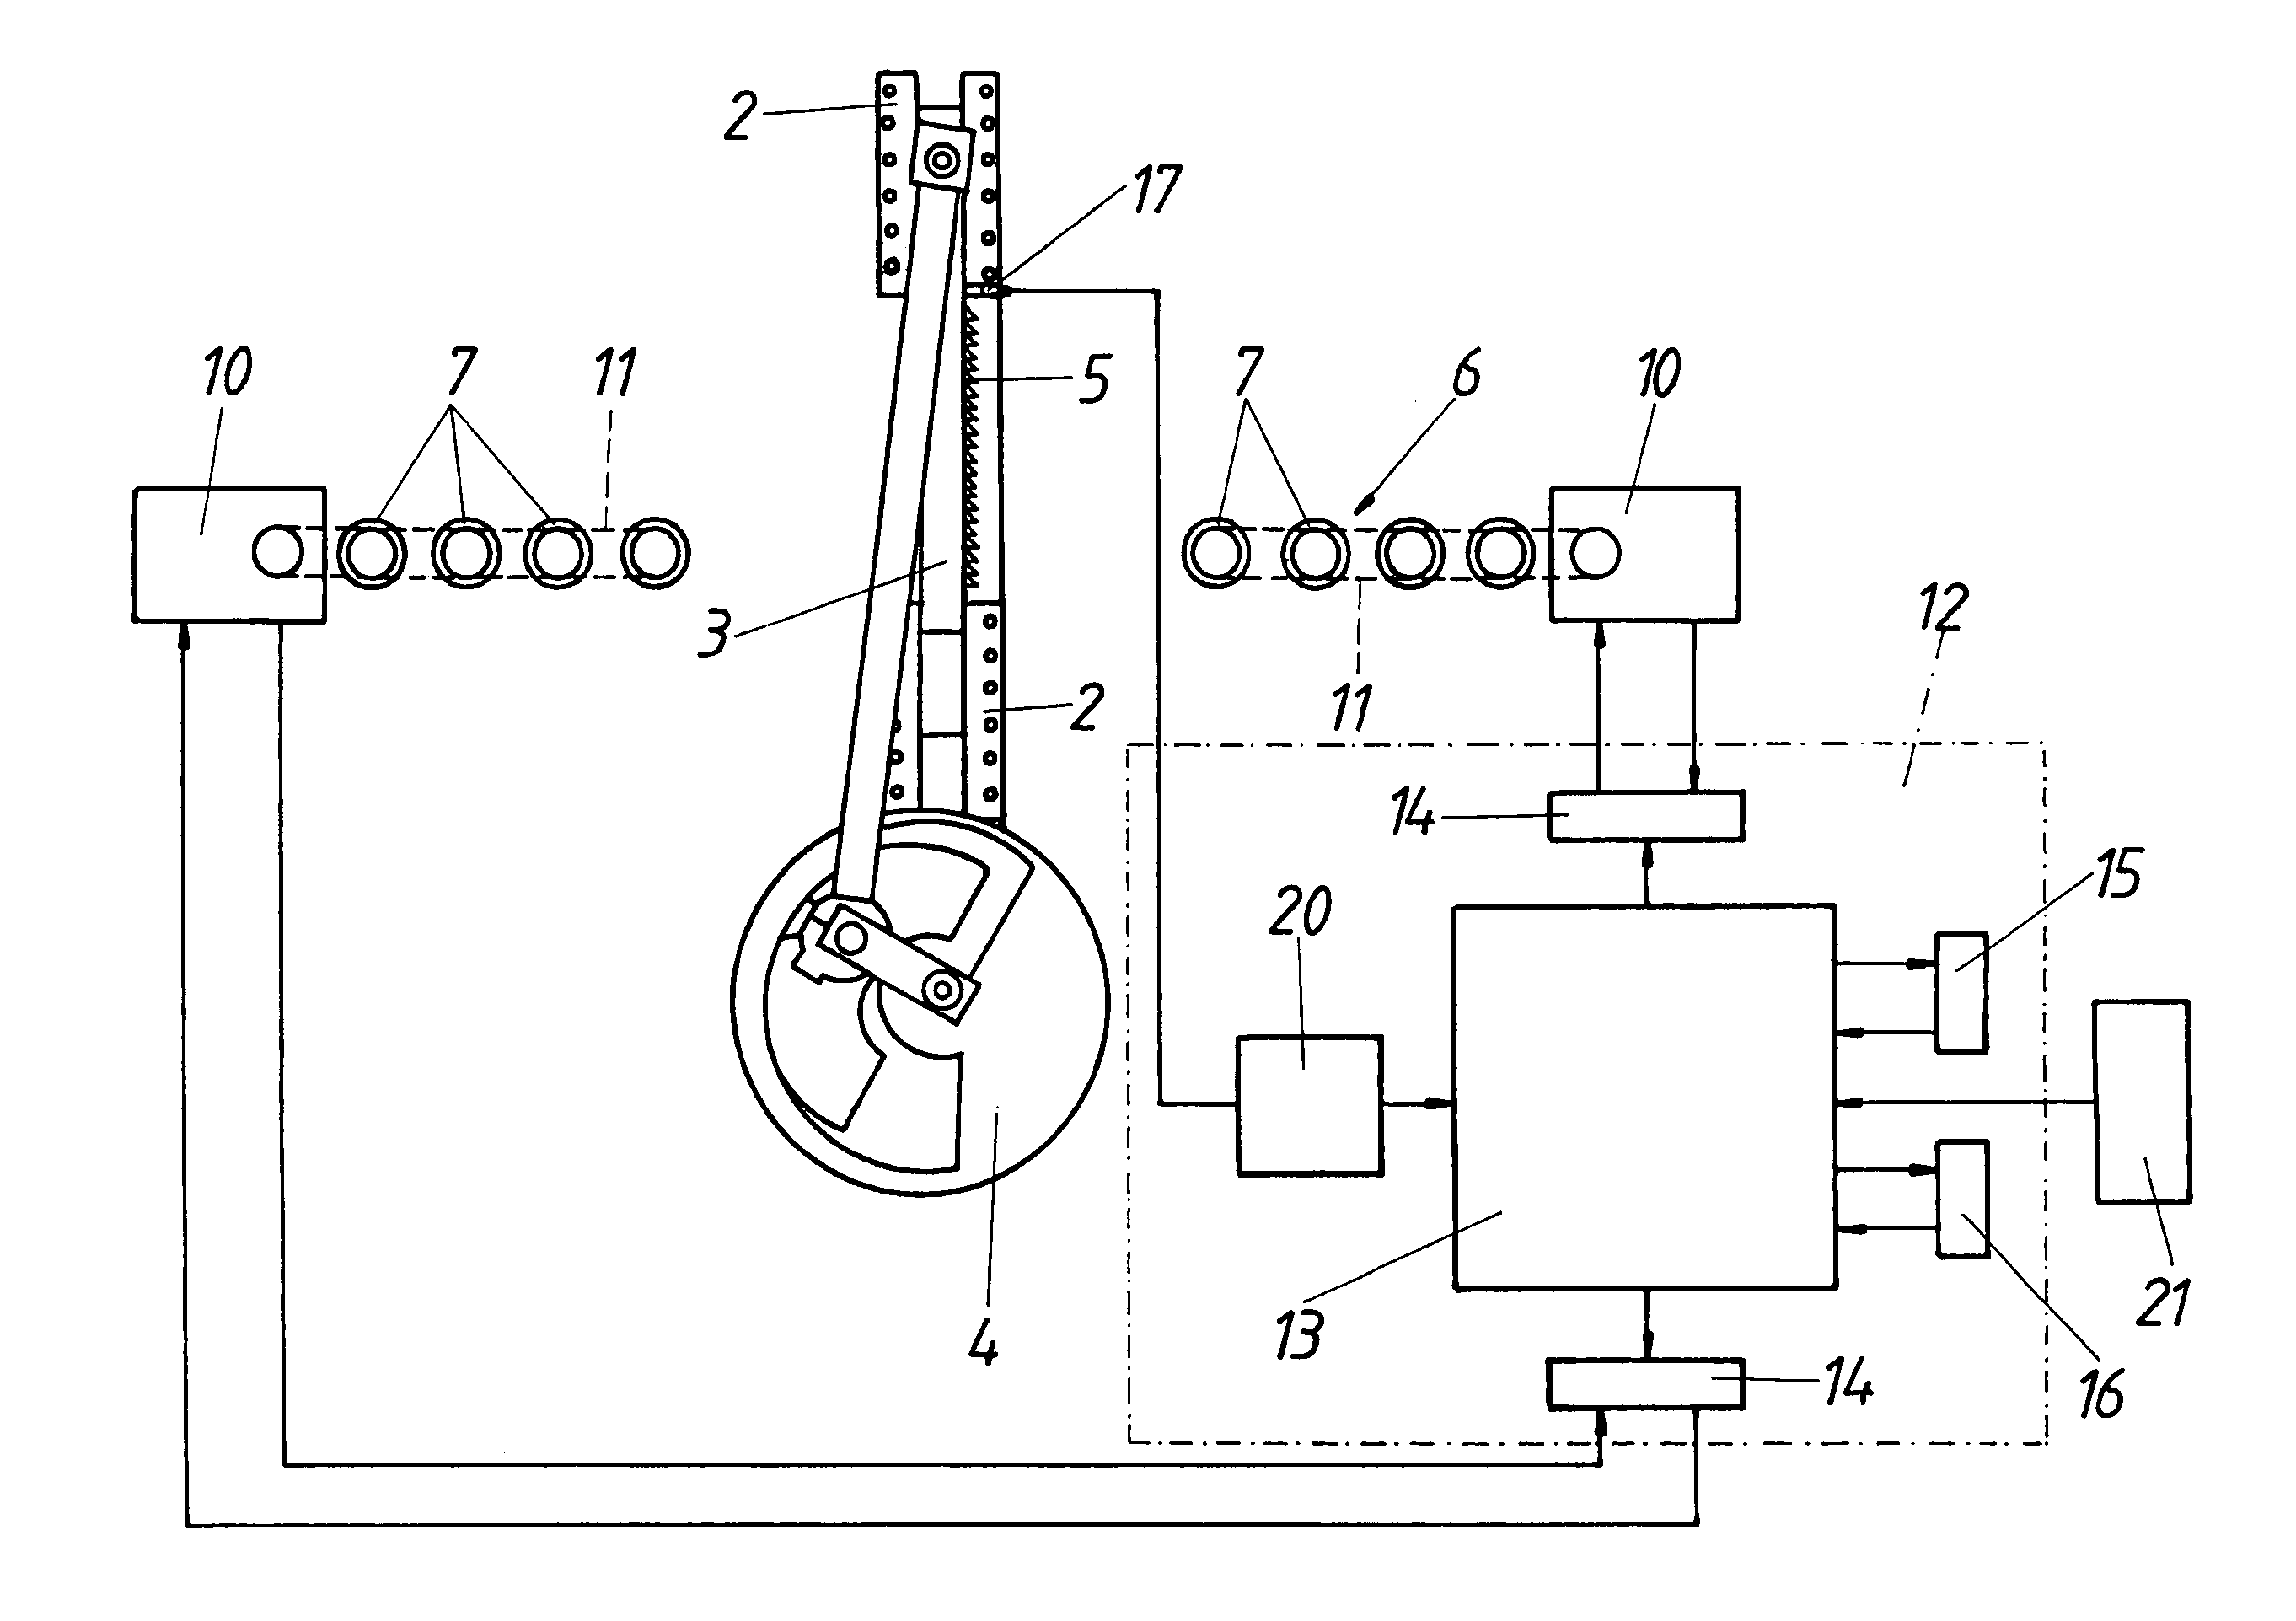 Reciprocating saw comprising a program-controlled feed conveyor for advancing the item to be cut